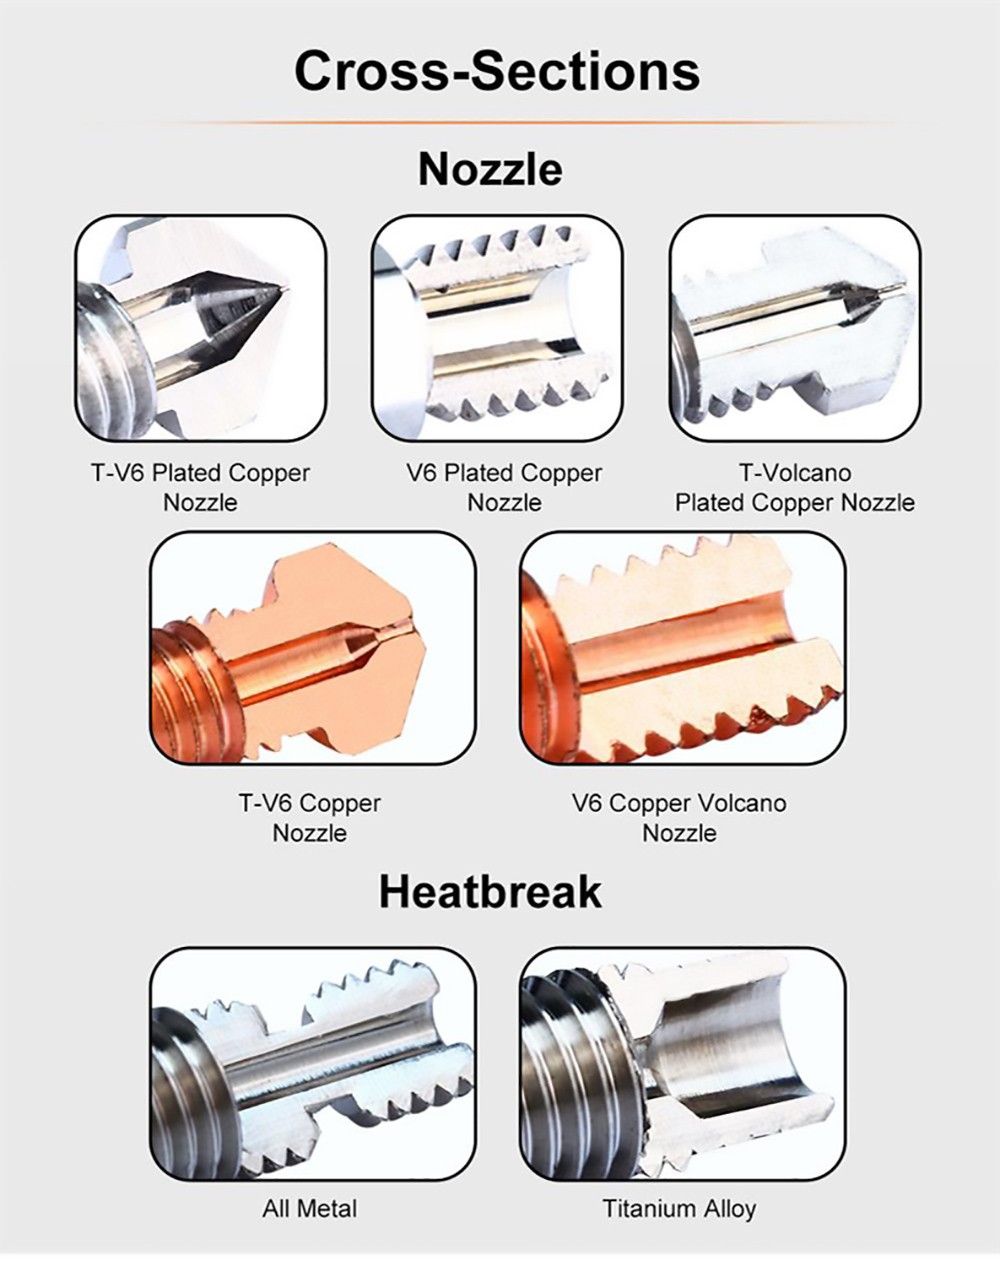 Trianglelab M6 ZS 0.4mm Nozzle, Hardened Steel Copper Alloy, High Temperature Resistant, for V6 Hotend 3D Printer